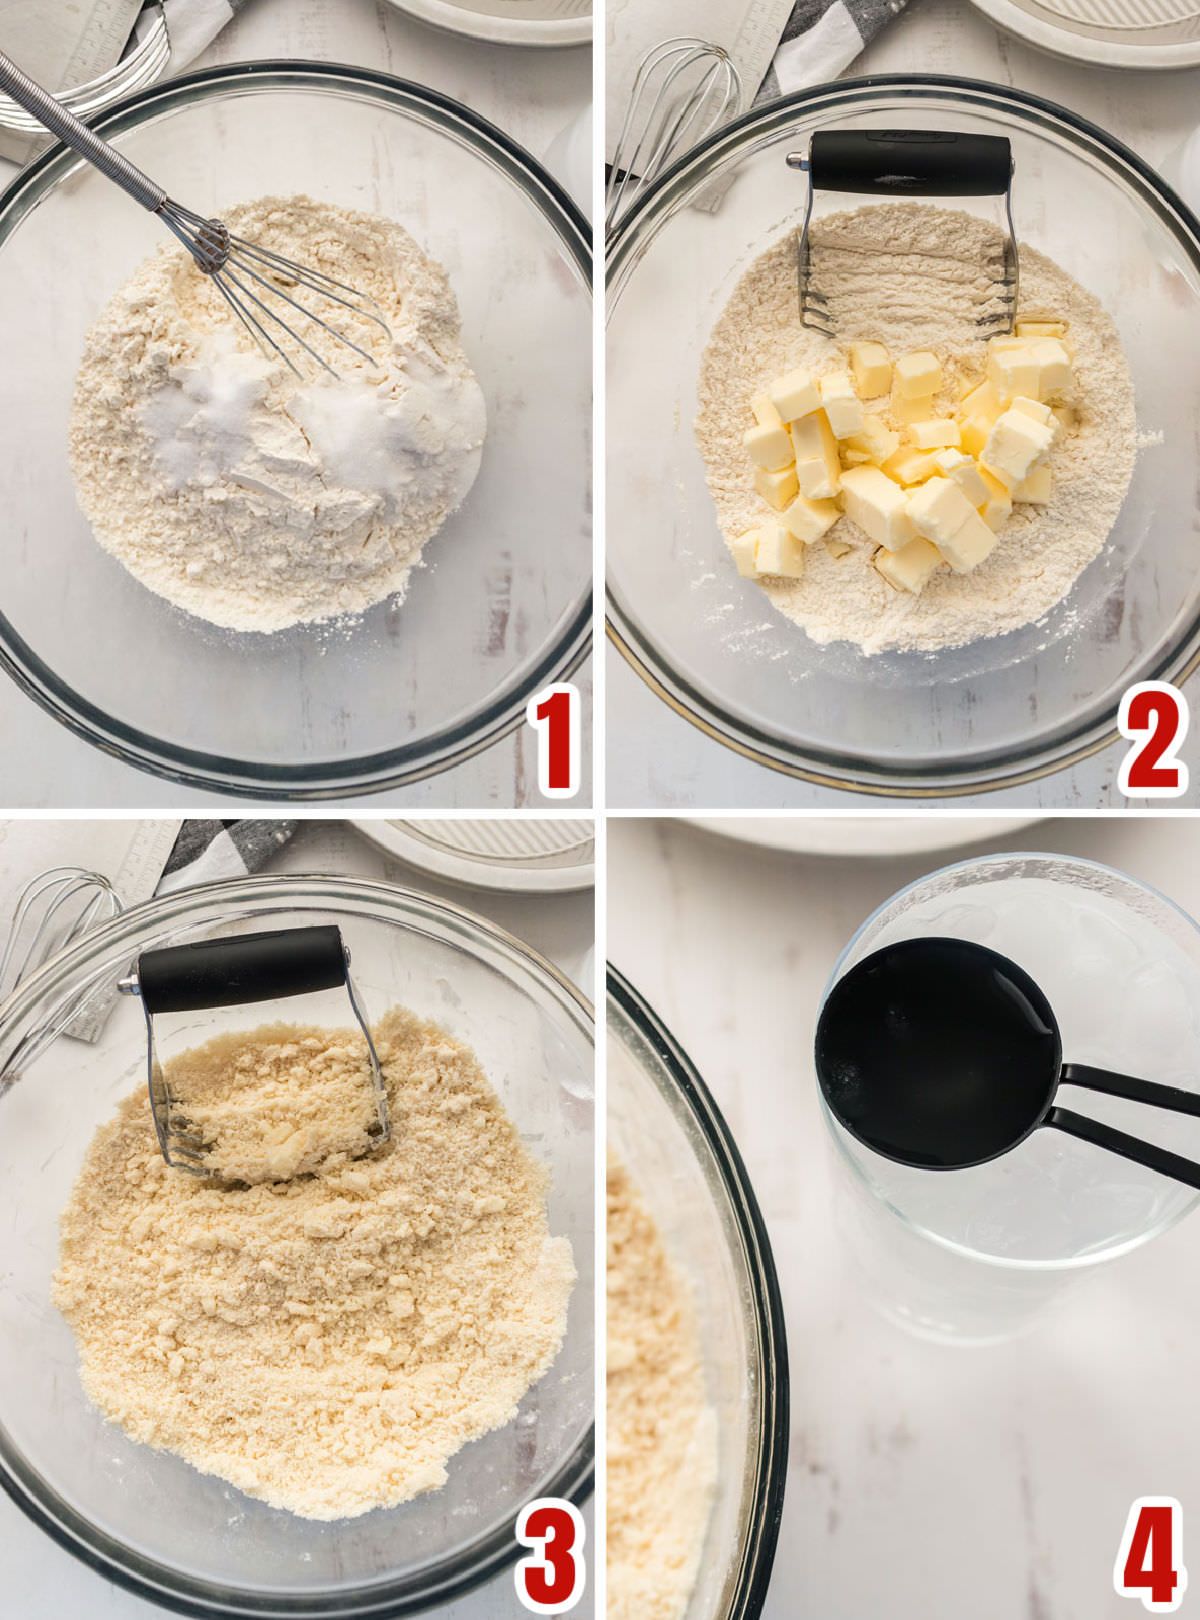 Collage image showing the steps for making the pie crust dough including using ice cold water.